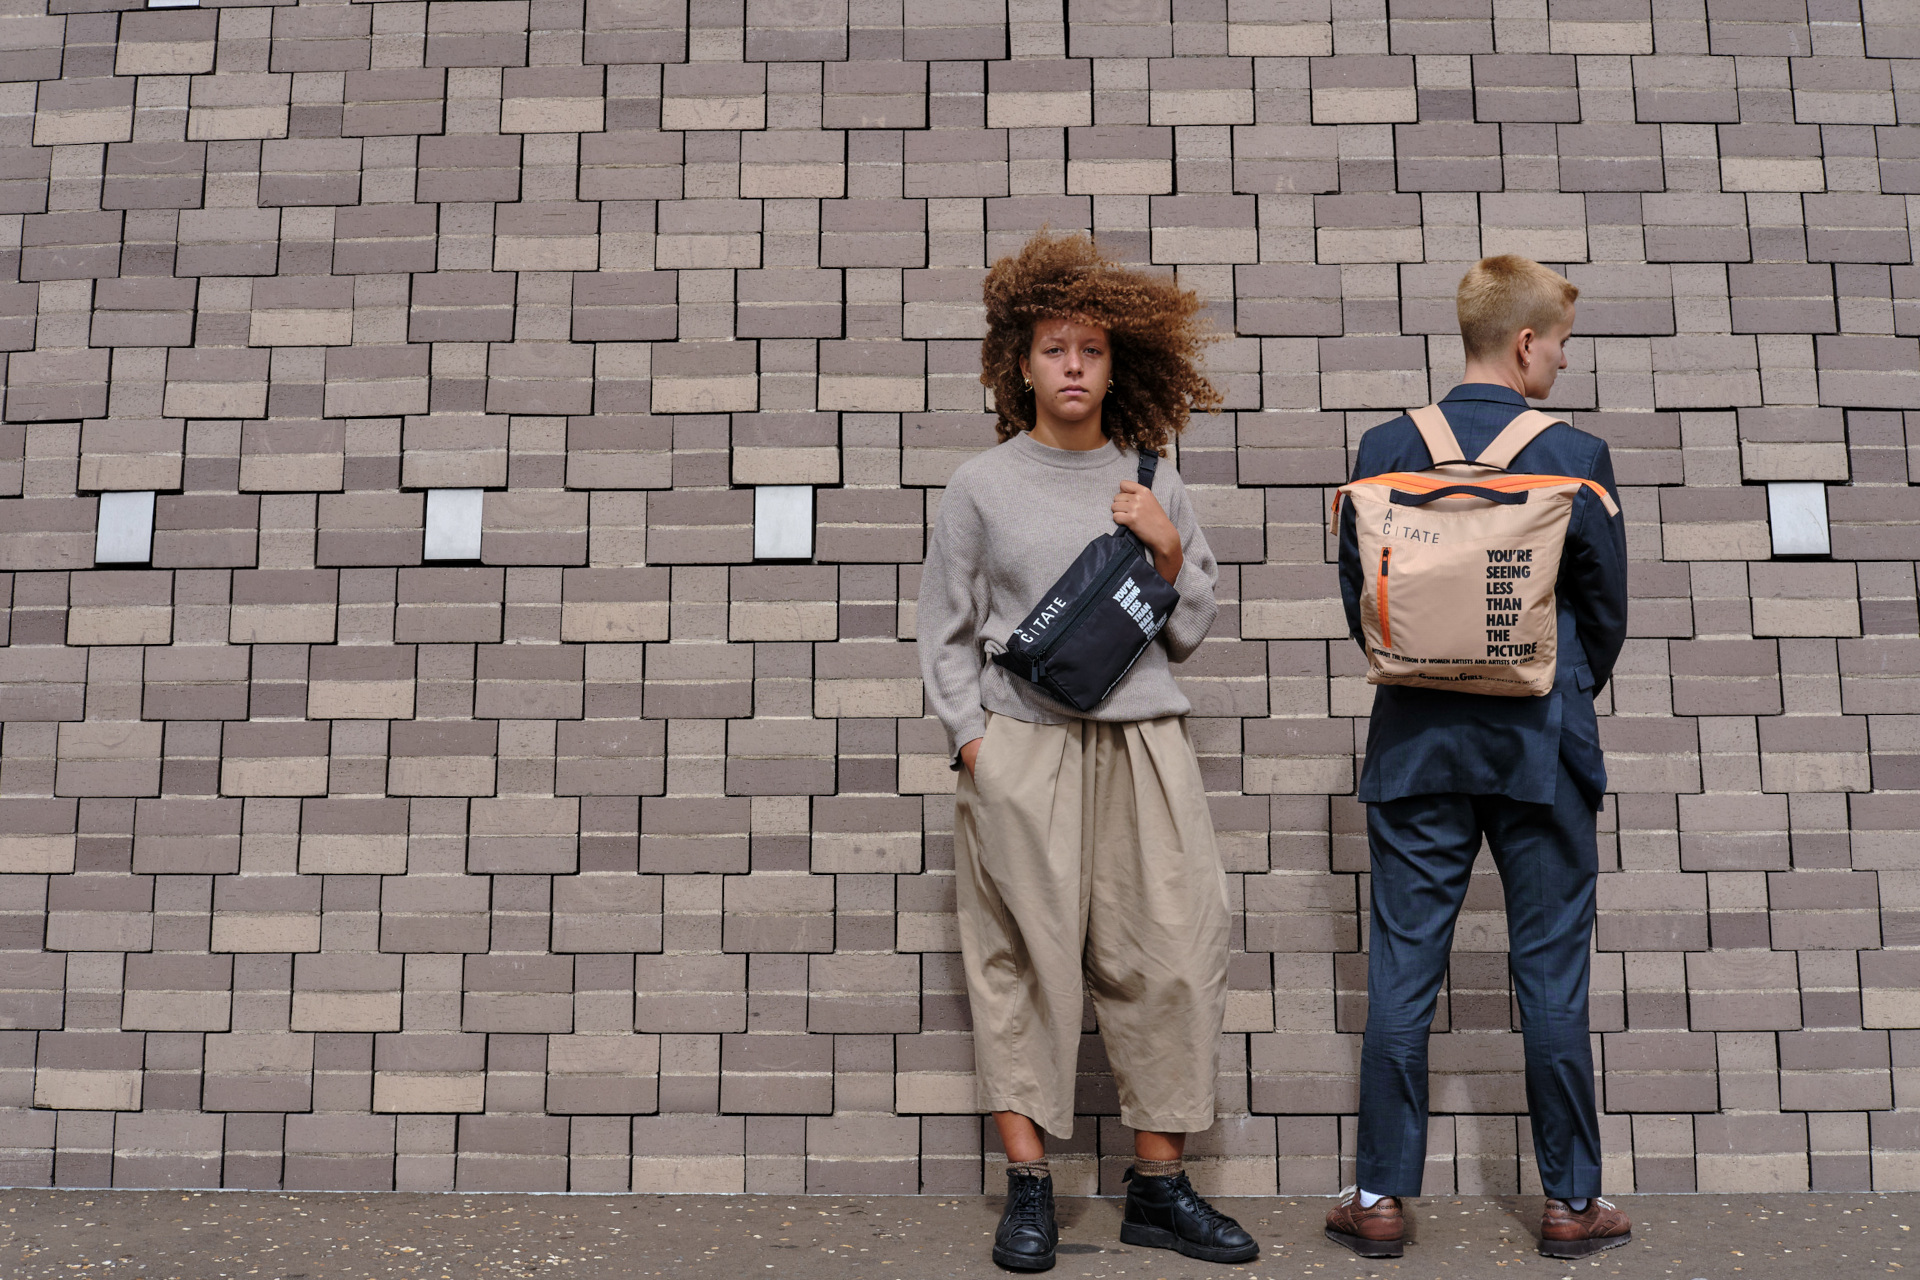 Models stood in front of brick wall wearing street clothes and bags